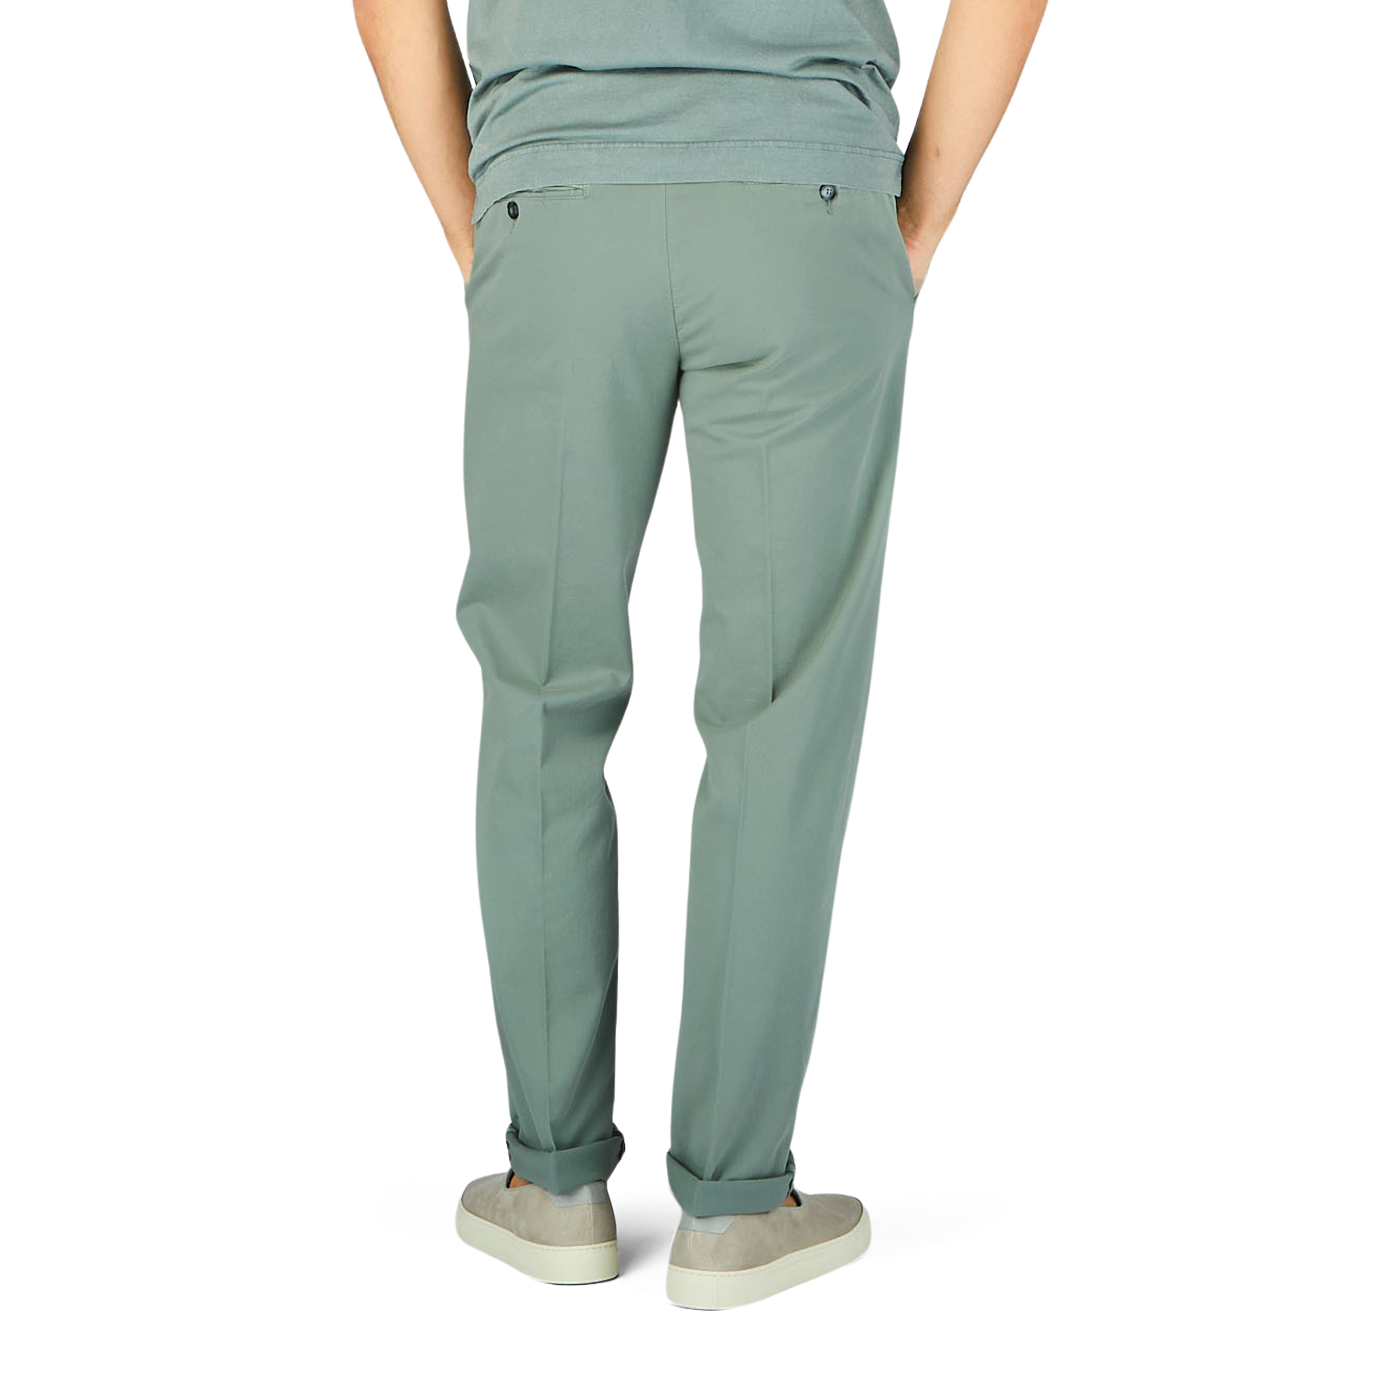 The man is wearing sage green cotton stretch flat front chinos from Canali.